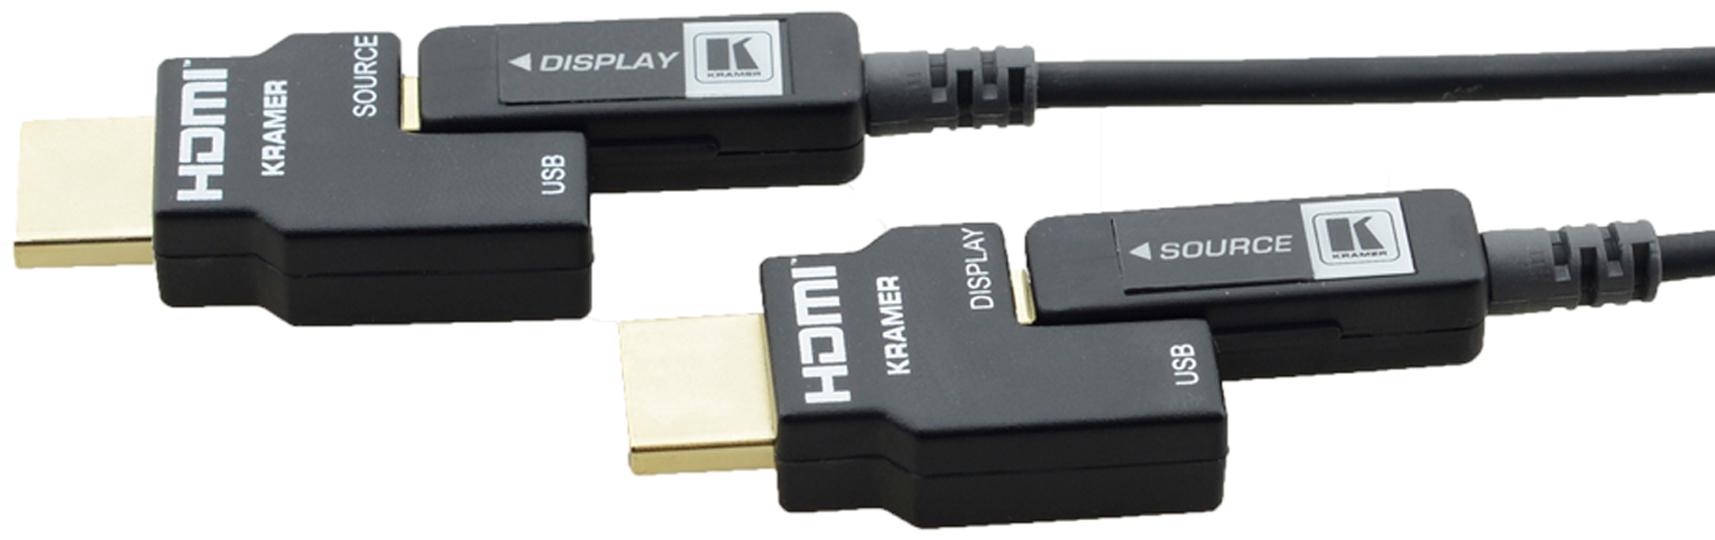 hdmi active cable